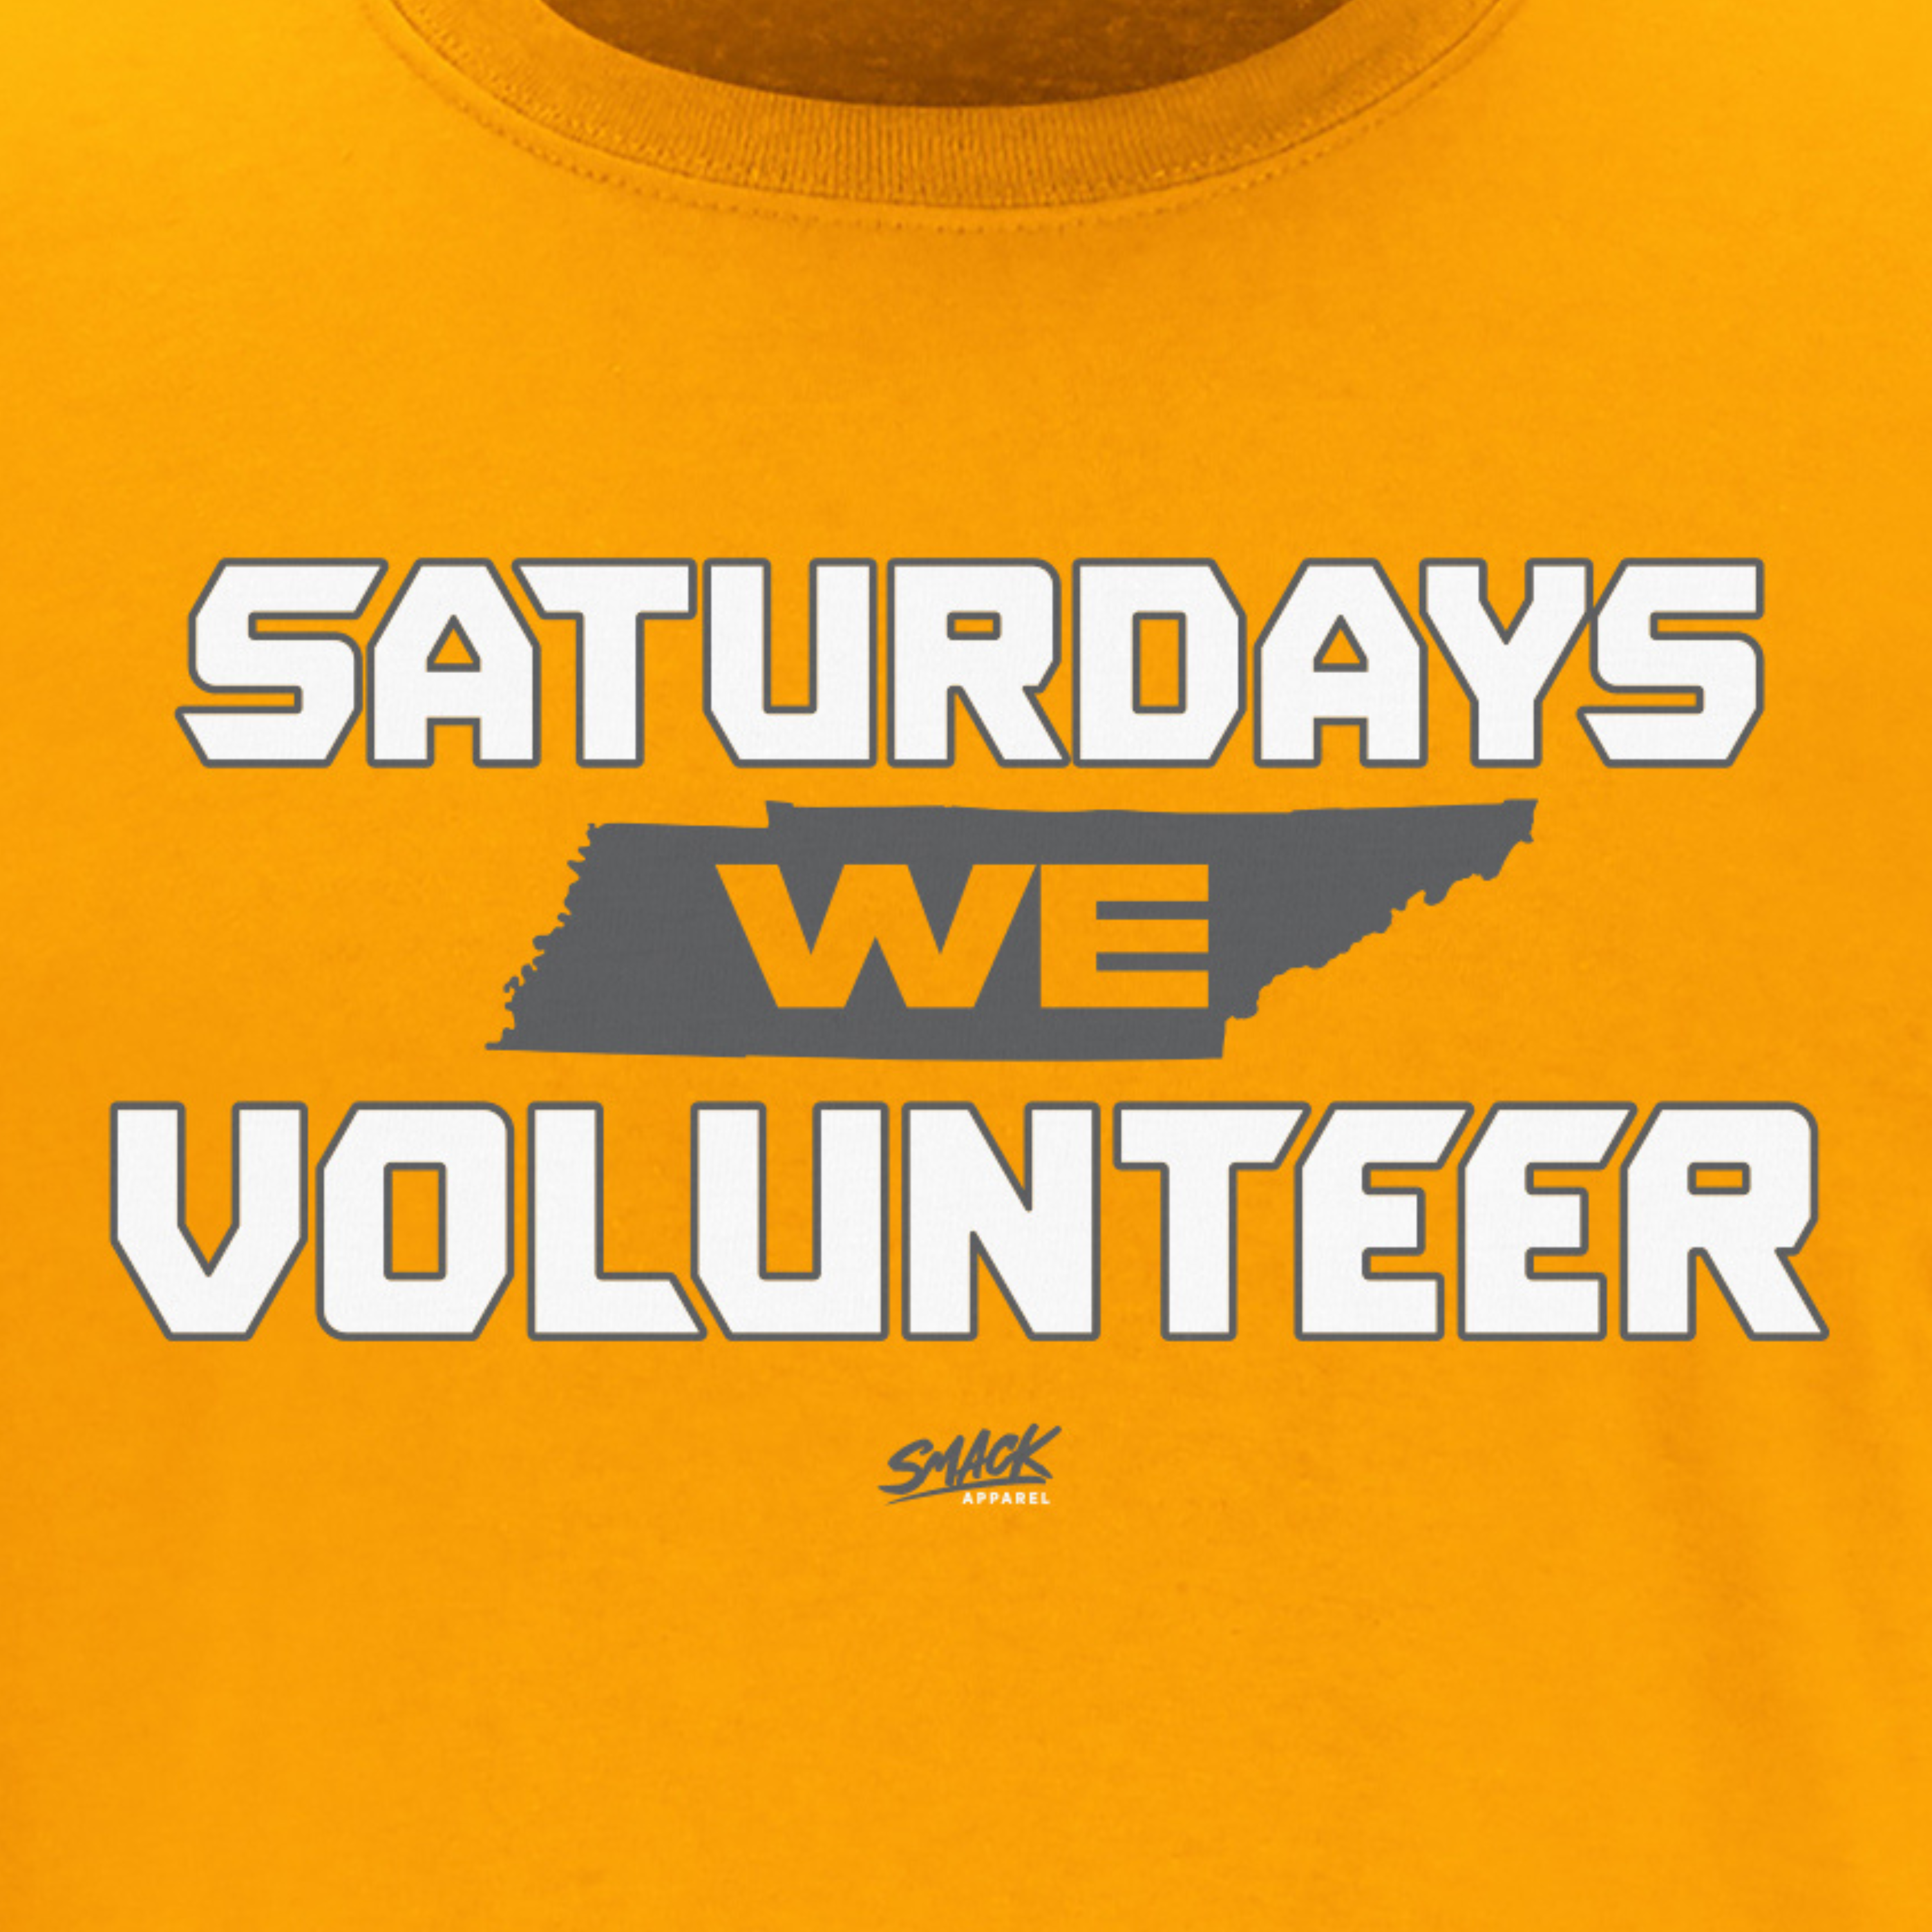 Saturdays We Volunteer Shirt for Tennessee College Football Fans